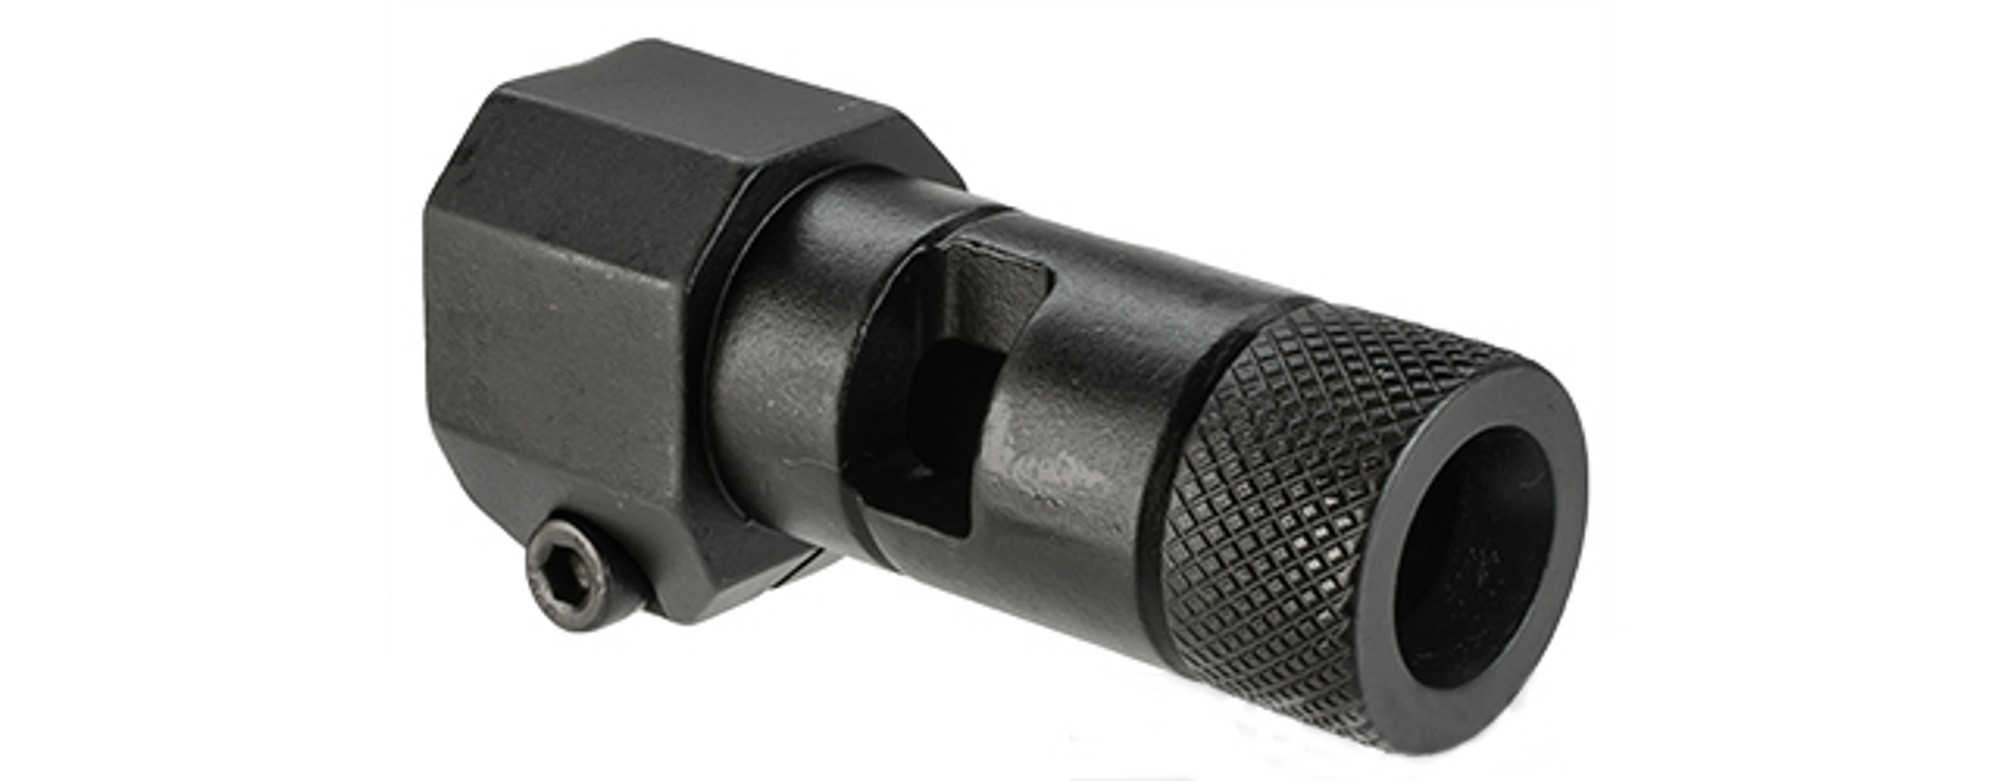 Guarder Steel Flash Hider  Muzzle Brake for KJW KC-02 Airsoft GBB Rifles - Type A